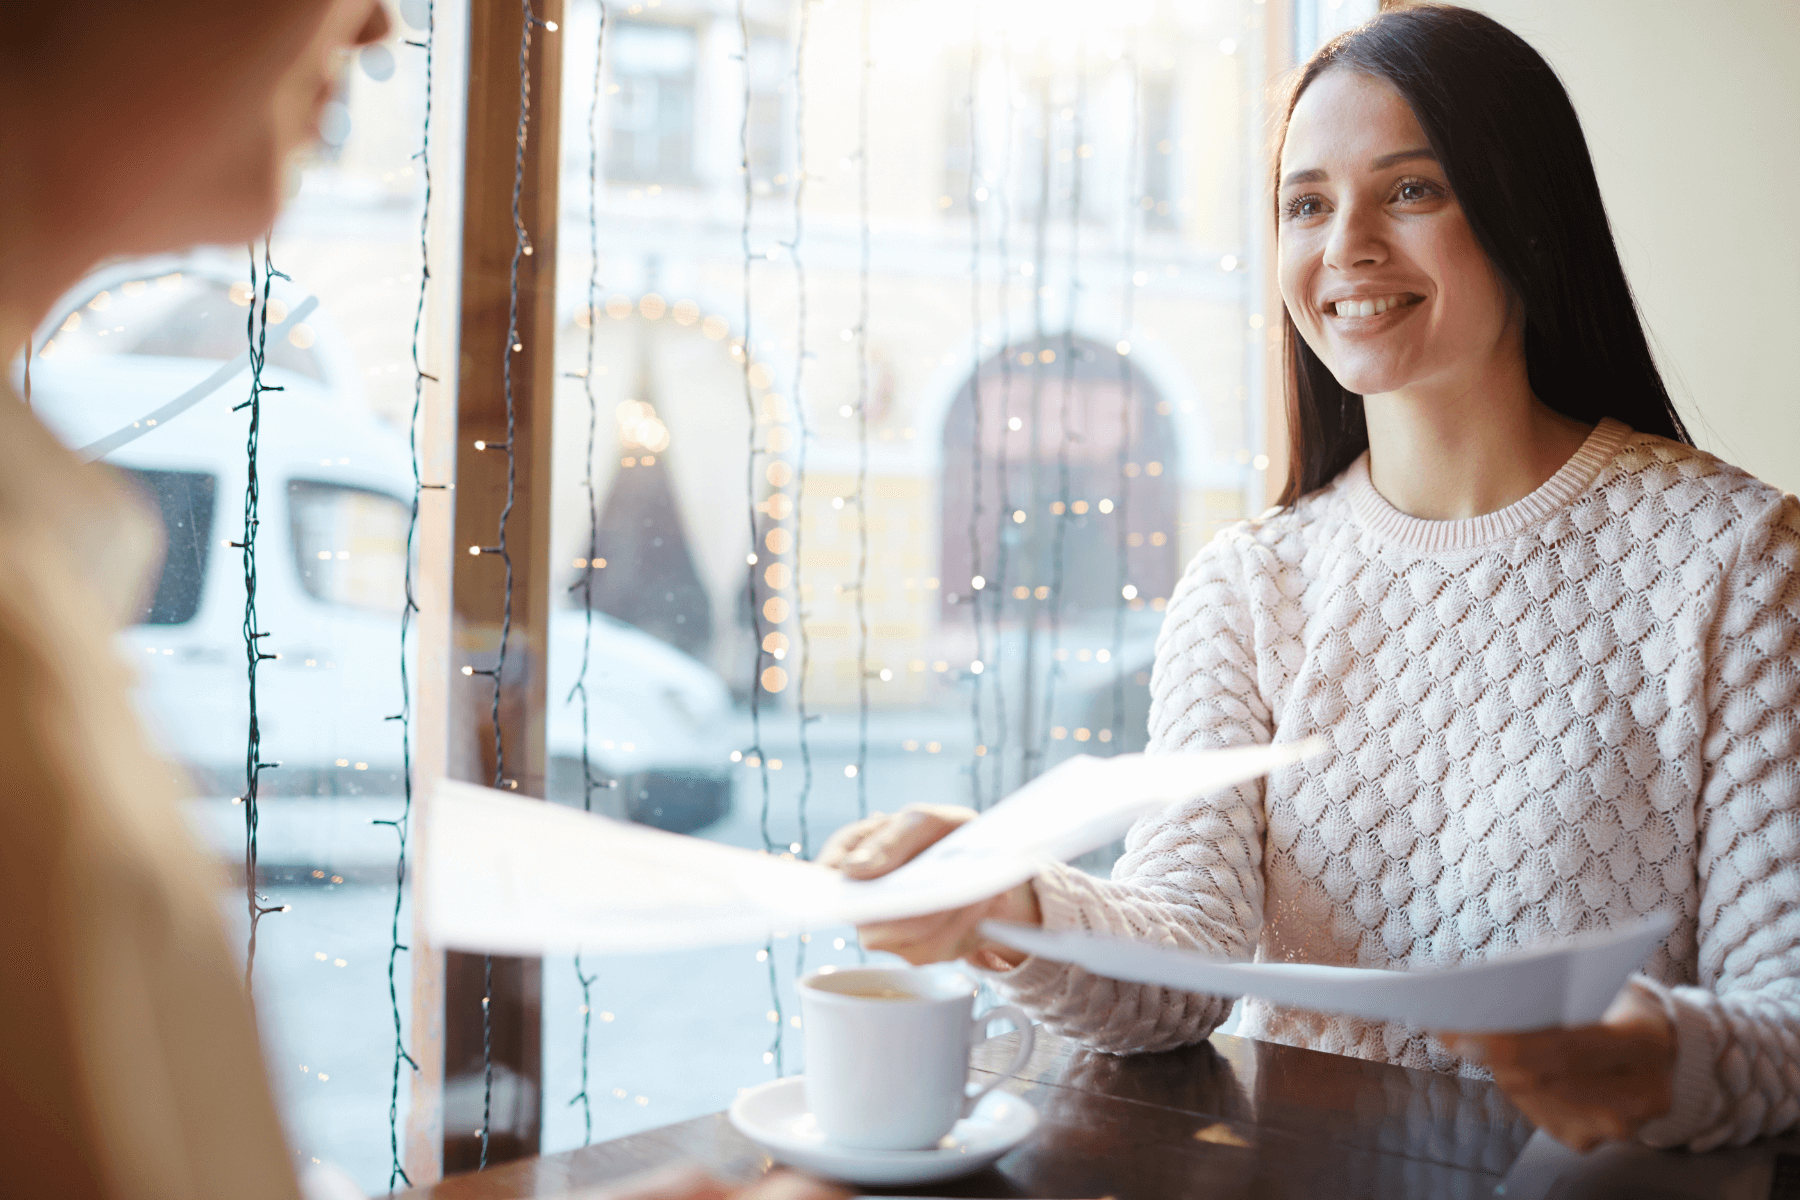 Woman hands resume and cover letter to another woman in a cafe